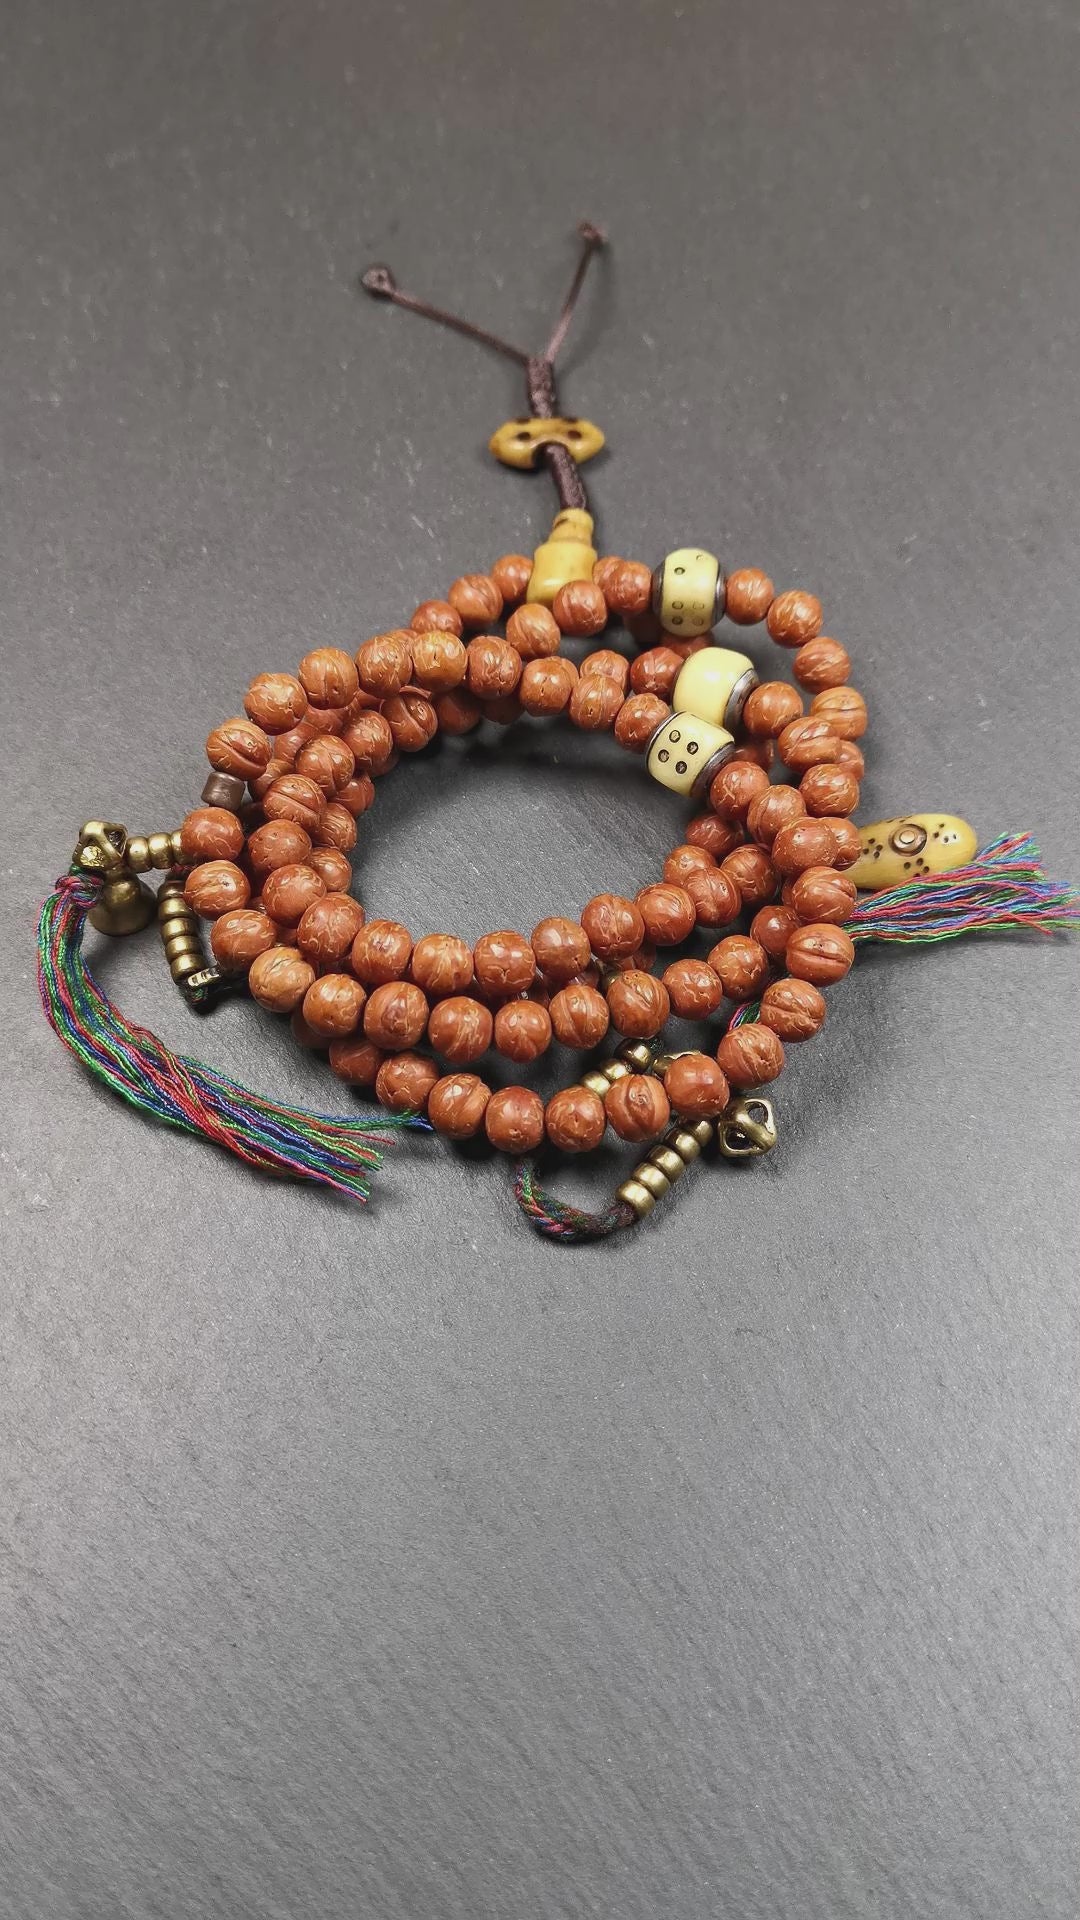 This bodhi beads mala is made by Tibetan craftsmen and come from Hepo Town, Baiyu County, the birthplace of the famous Tibetan handicrafts,about 30 years old, hold and blessed by a lama in Baiyu Monastery.  It is composed of 108 bodhi seed beads, and is equipped with 3 yak beads,copper bead counters are installed on both sides, 1 copper bead clip, 1 bone pendant bead,and finally consists a bone vajra on the end, very elegant.